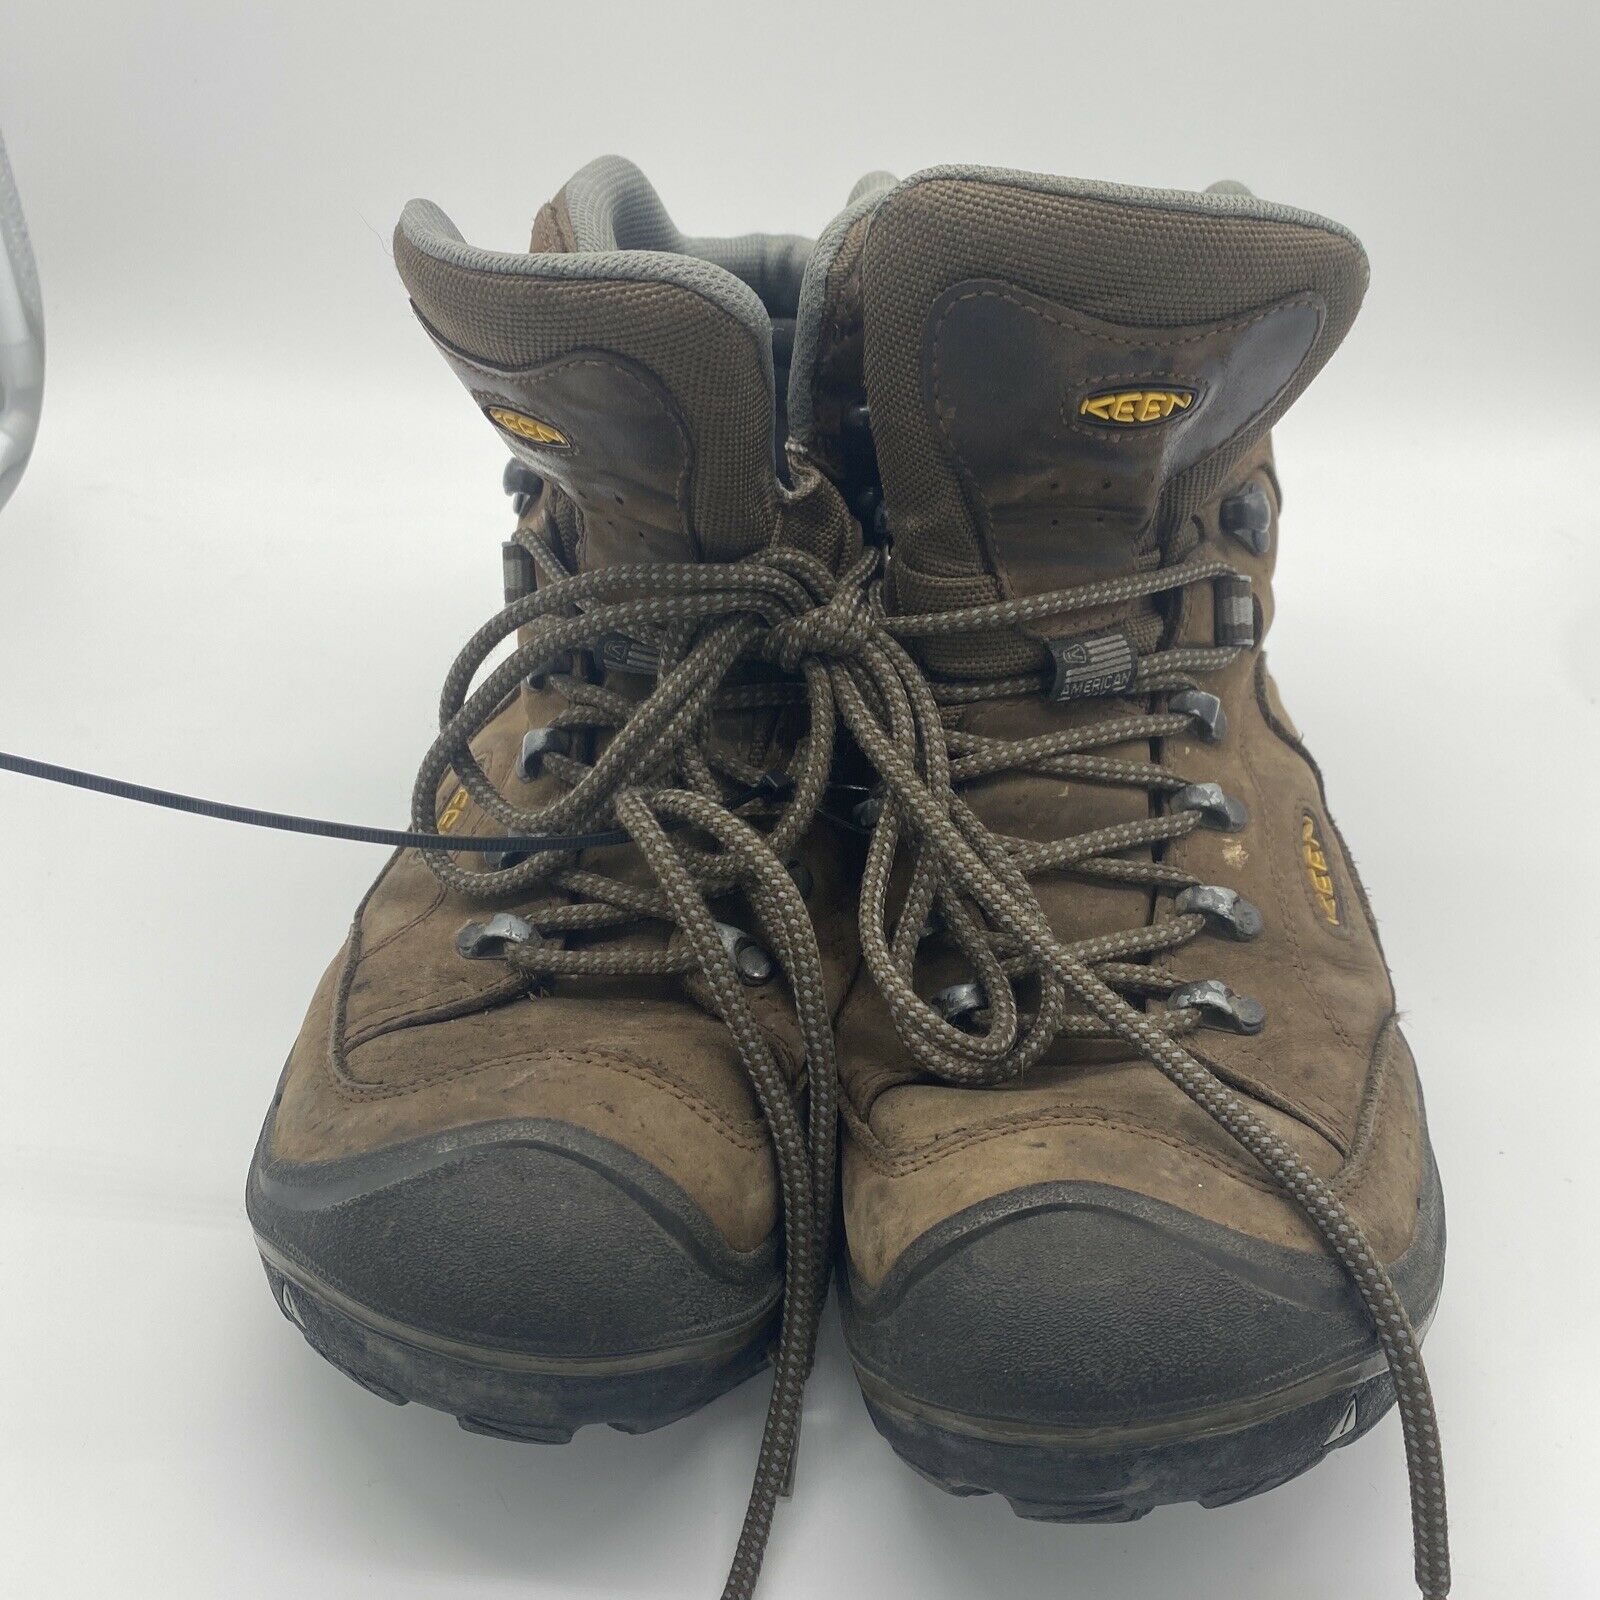 Keen Durand II Mid Brown Leather Hiking Boots 11.5 Mens 1020218 American Built